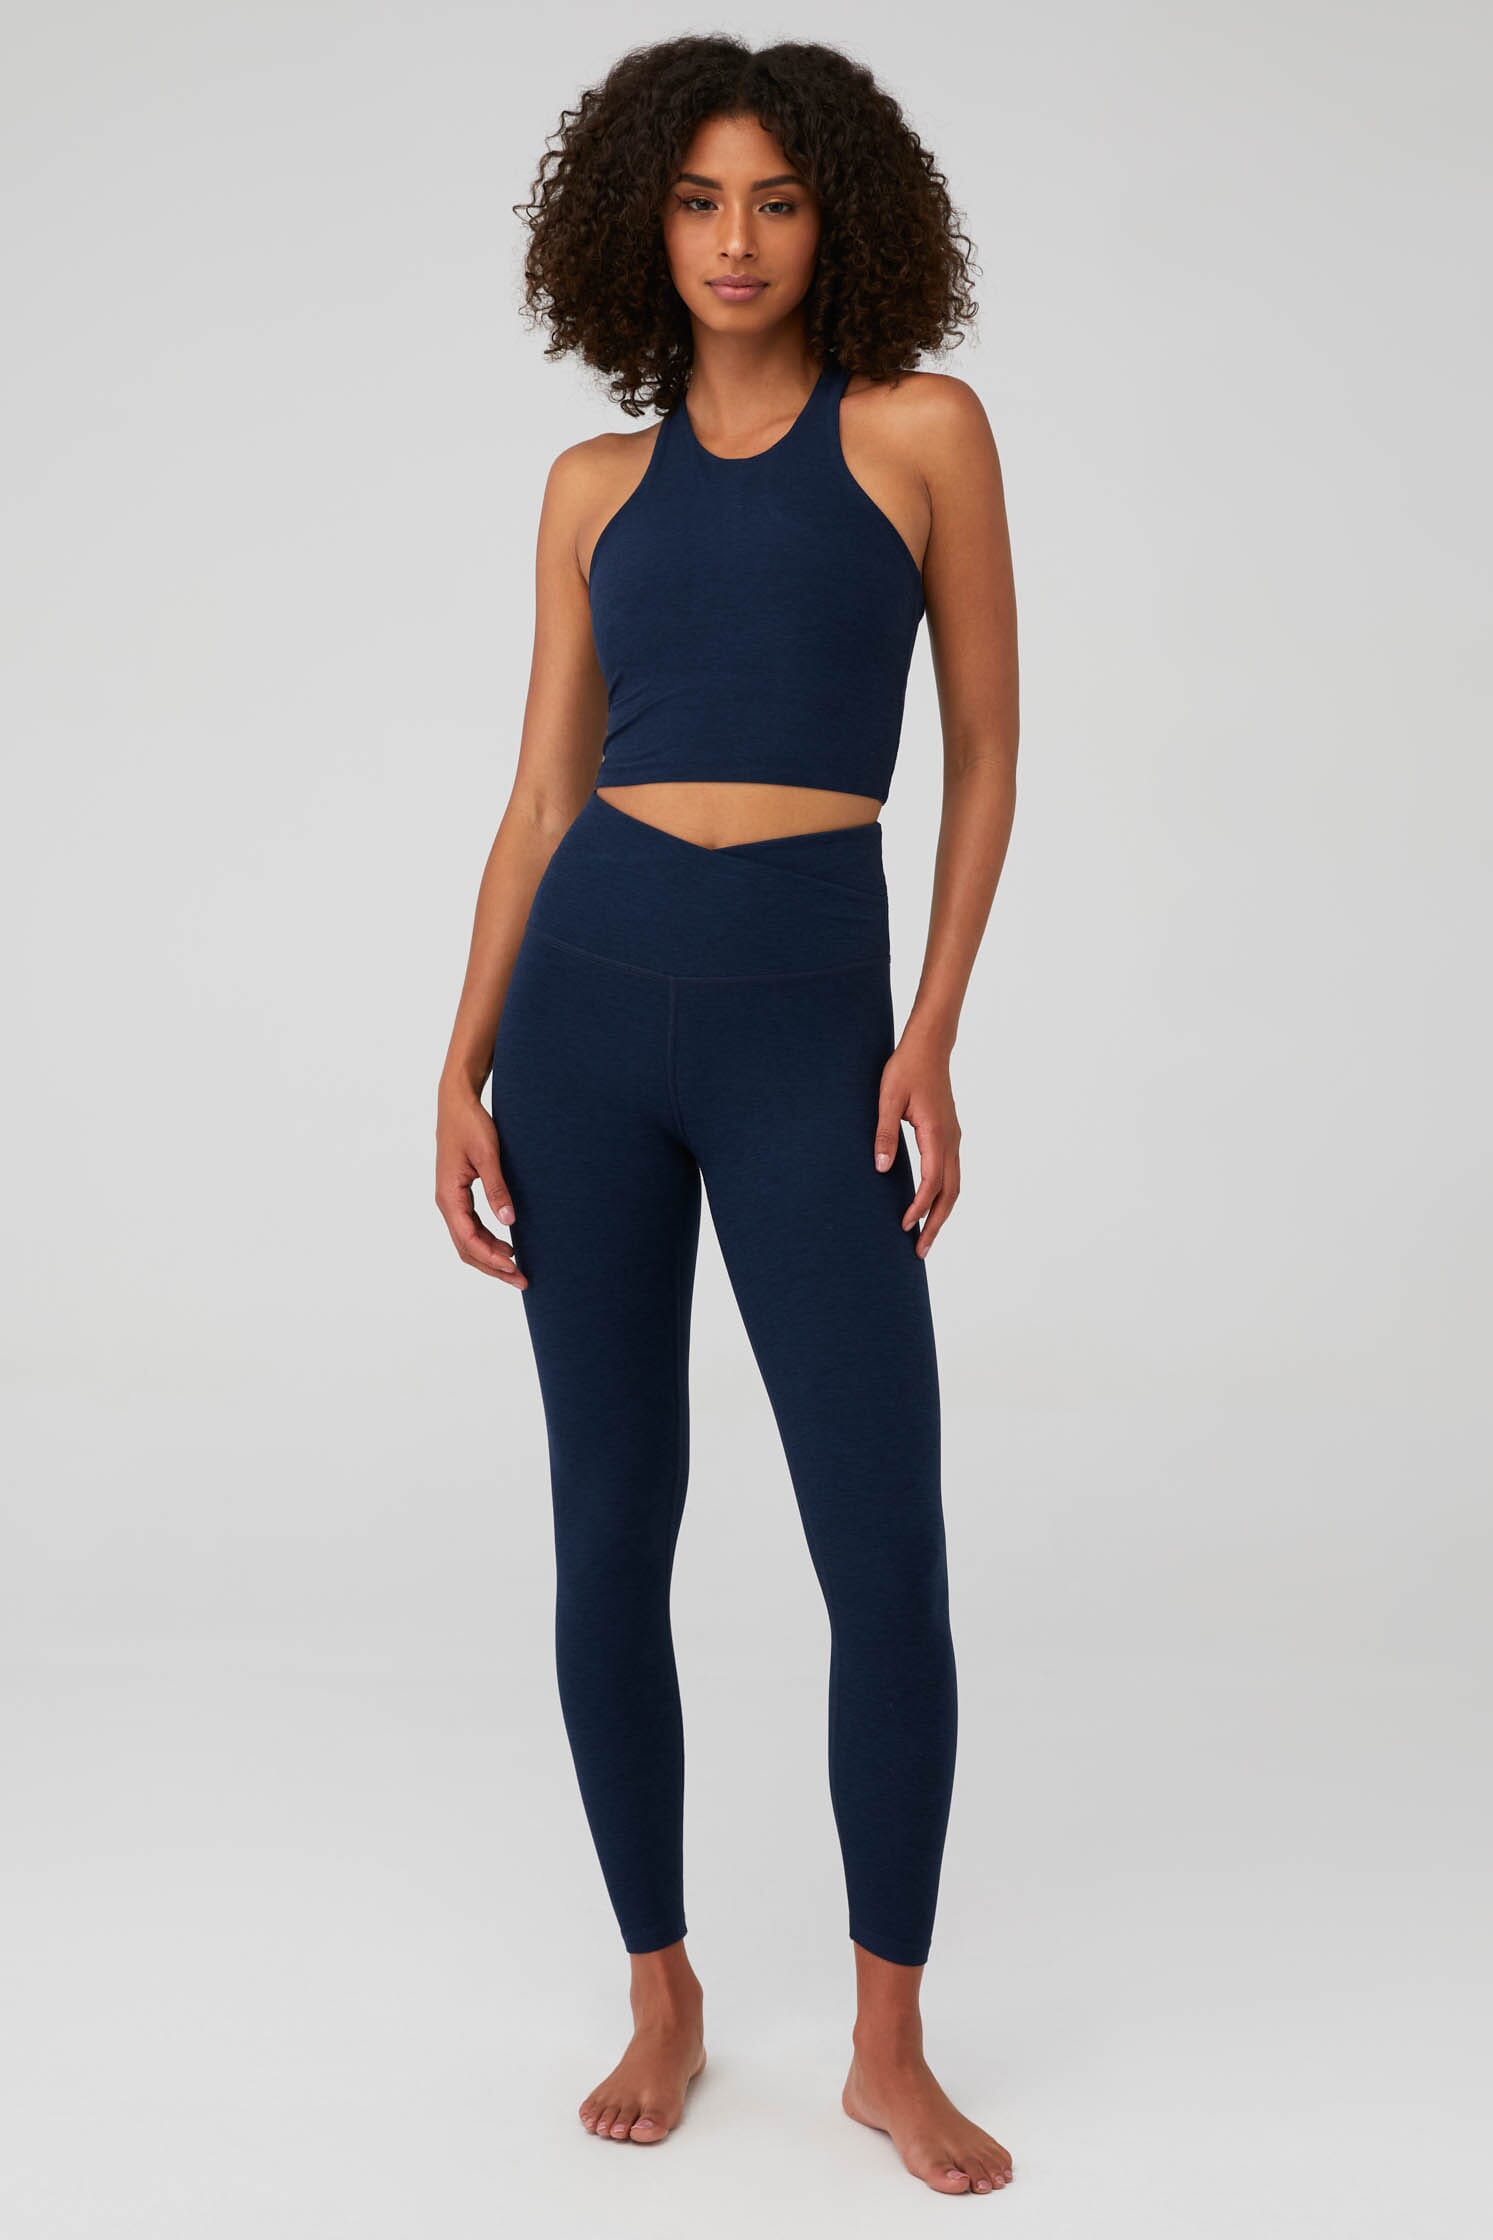 https://images.fashionpass.com/products/spacedye-at-your-leisure-high-waisted-midi-legging-beyond-yoga-nocturnal-navy-ae2-4.jpg?profile=a